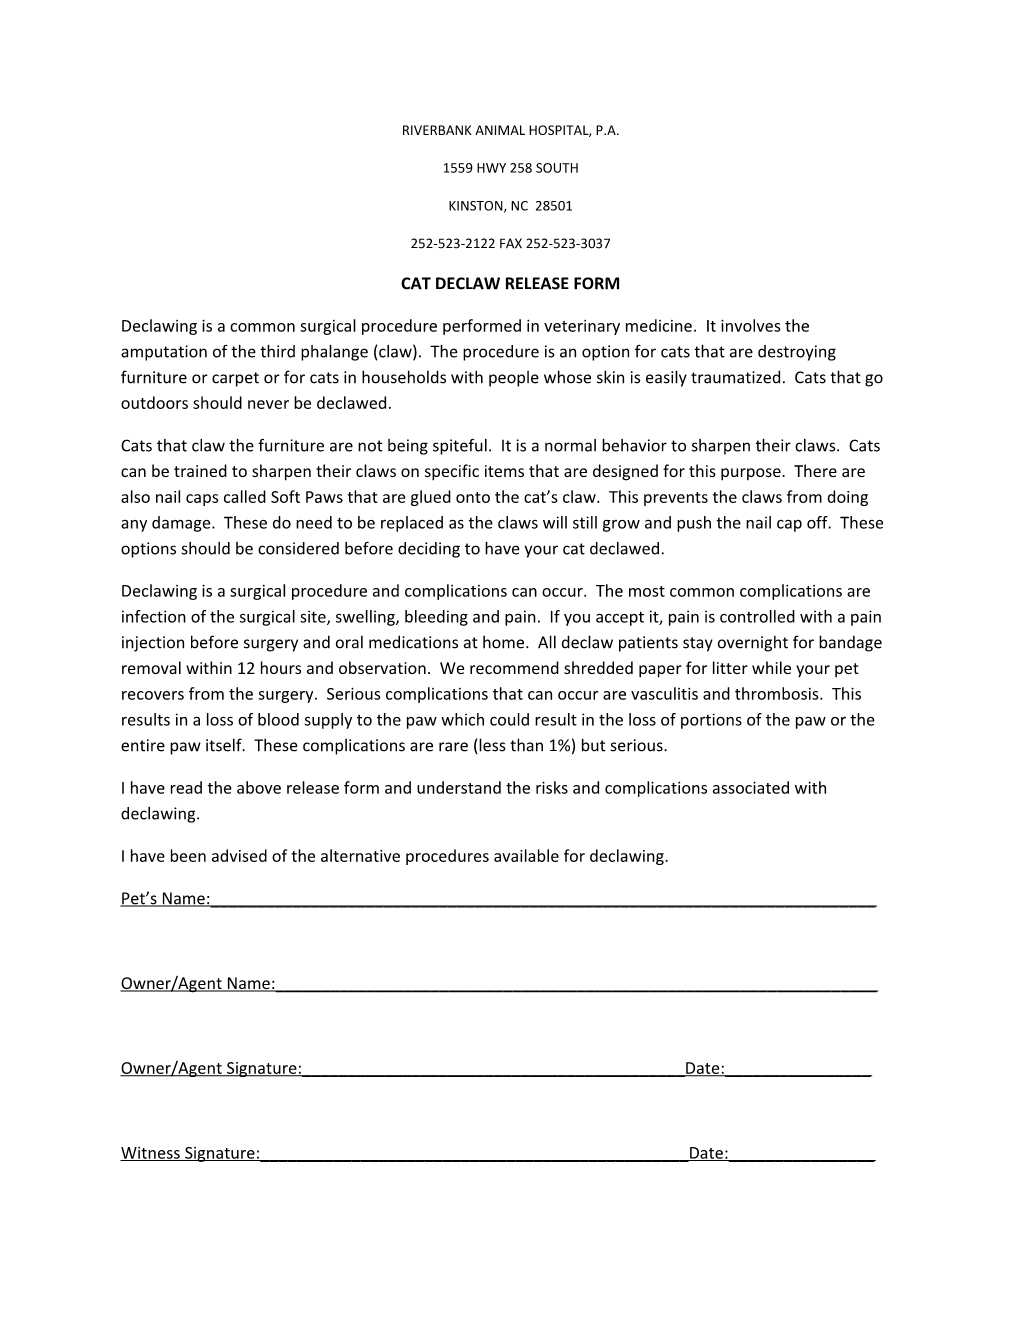 Cat Declaw Release Form